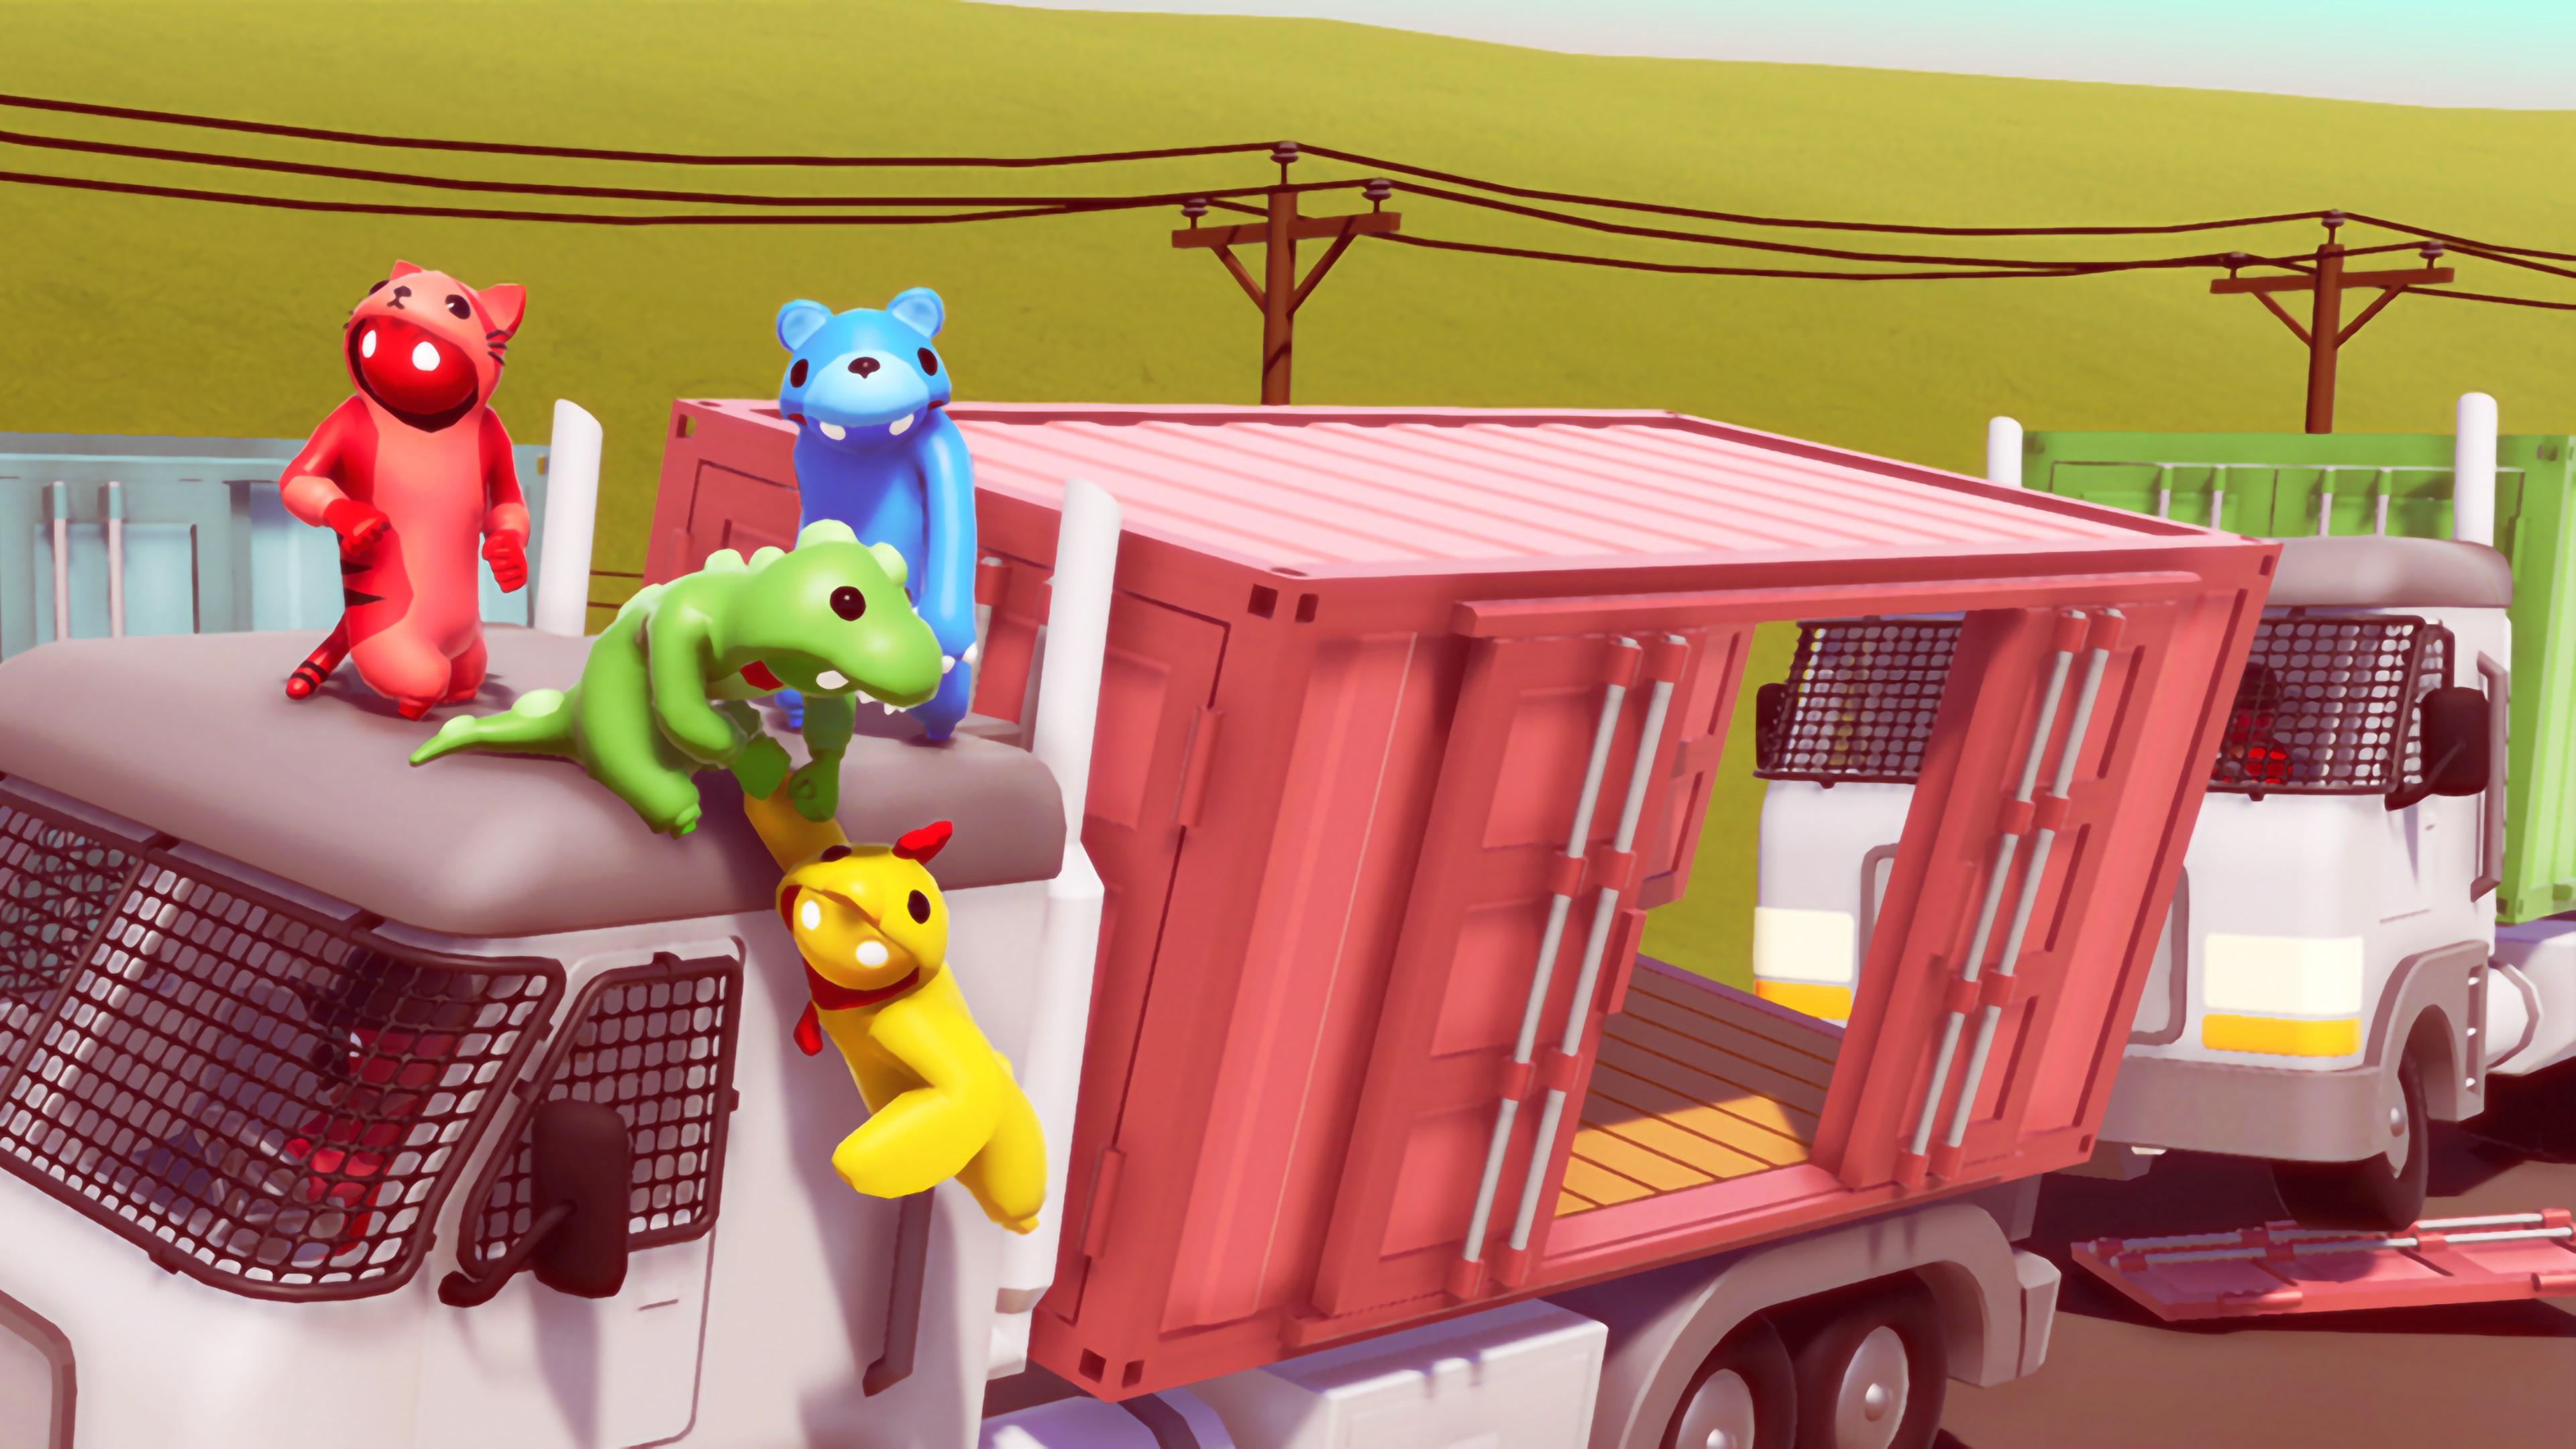 gang beasts xbox store